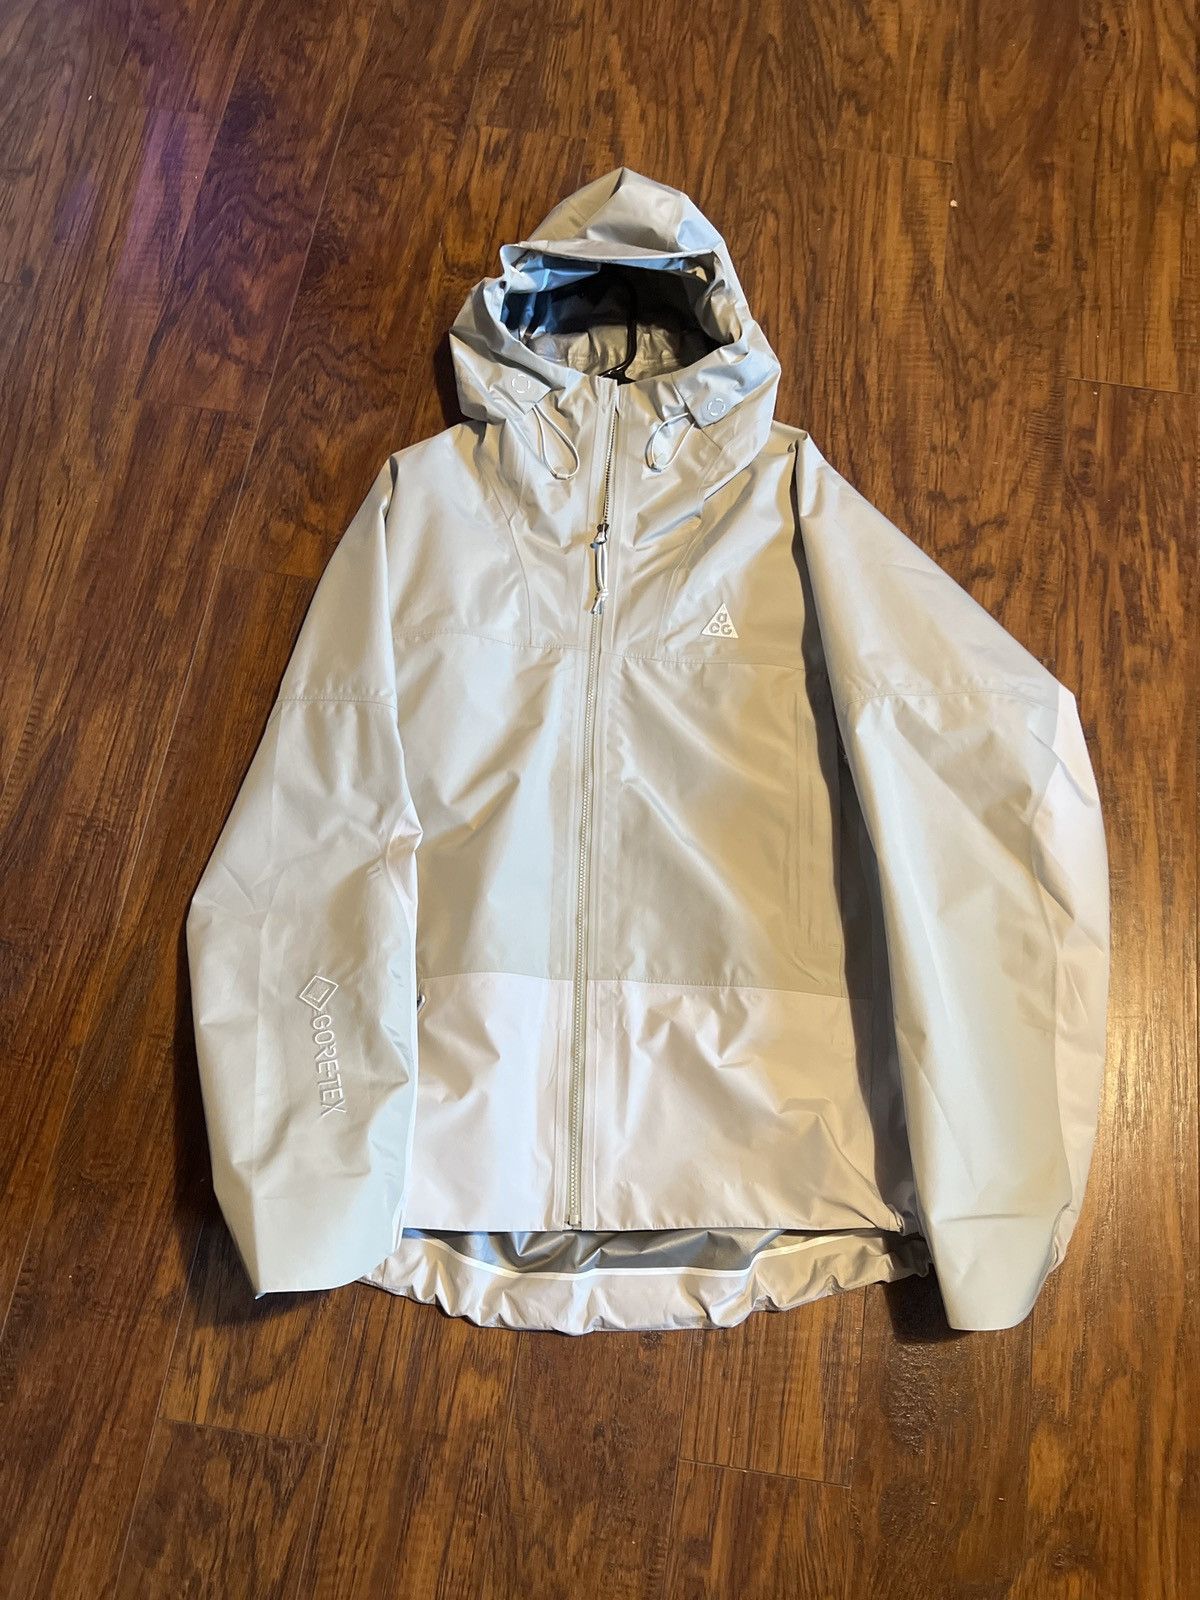 Nike ACG Nike ACG Chain of Craters gore-Tex jacket | Grailed